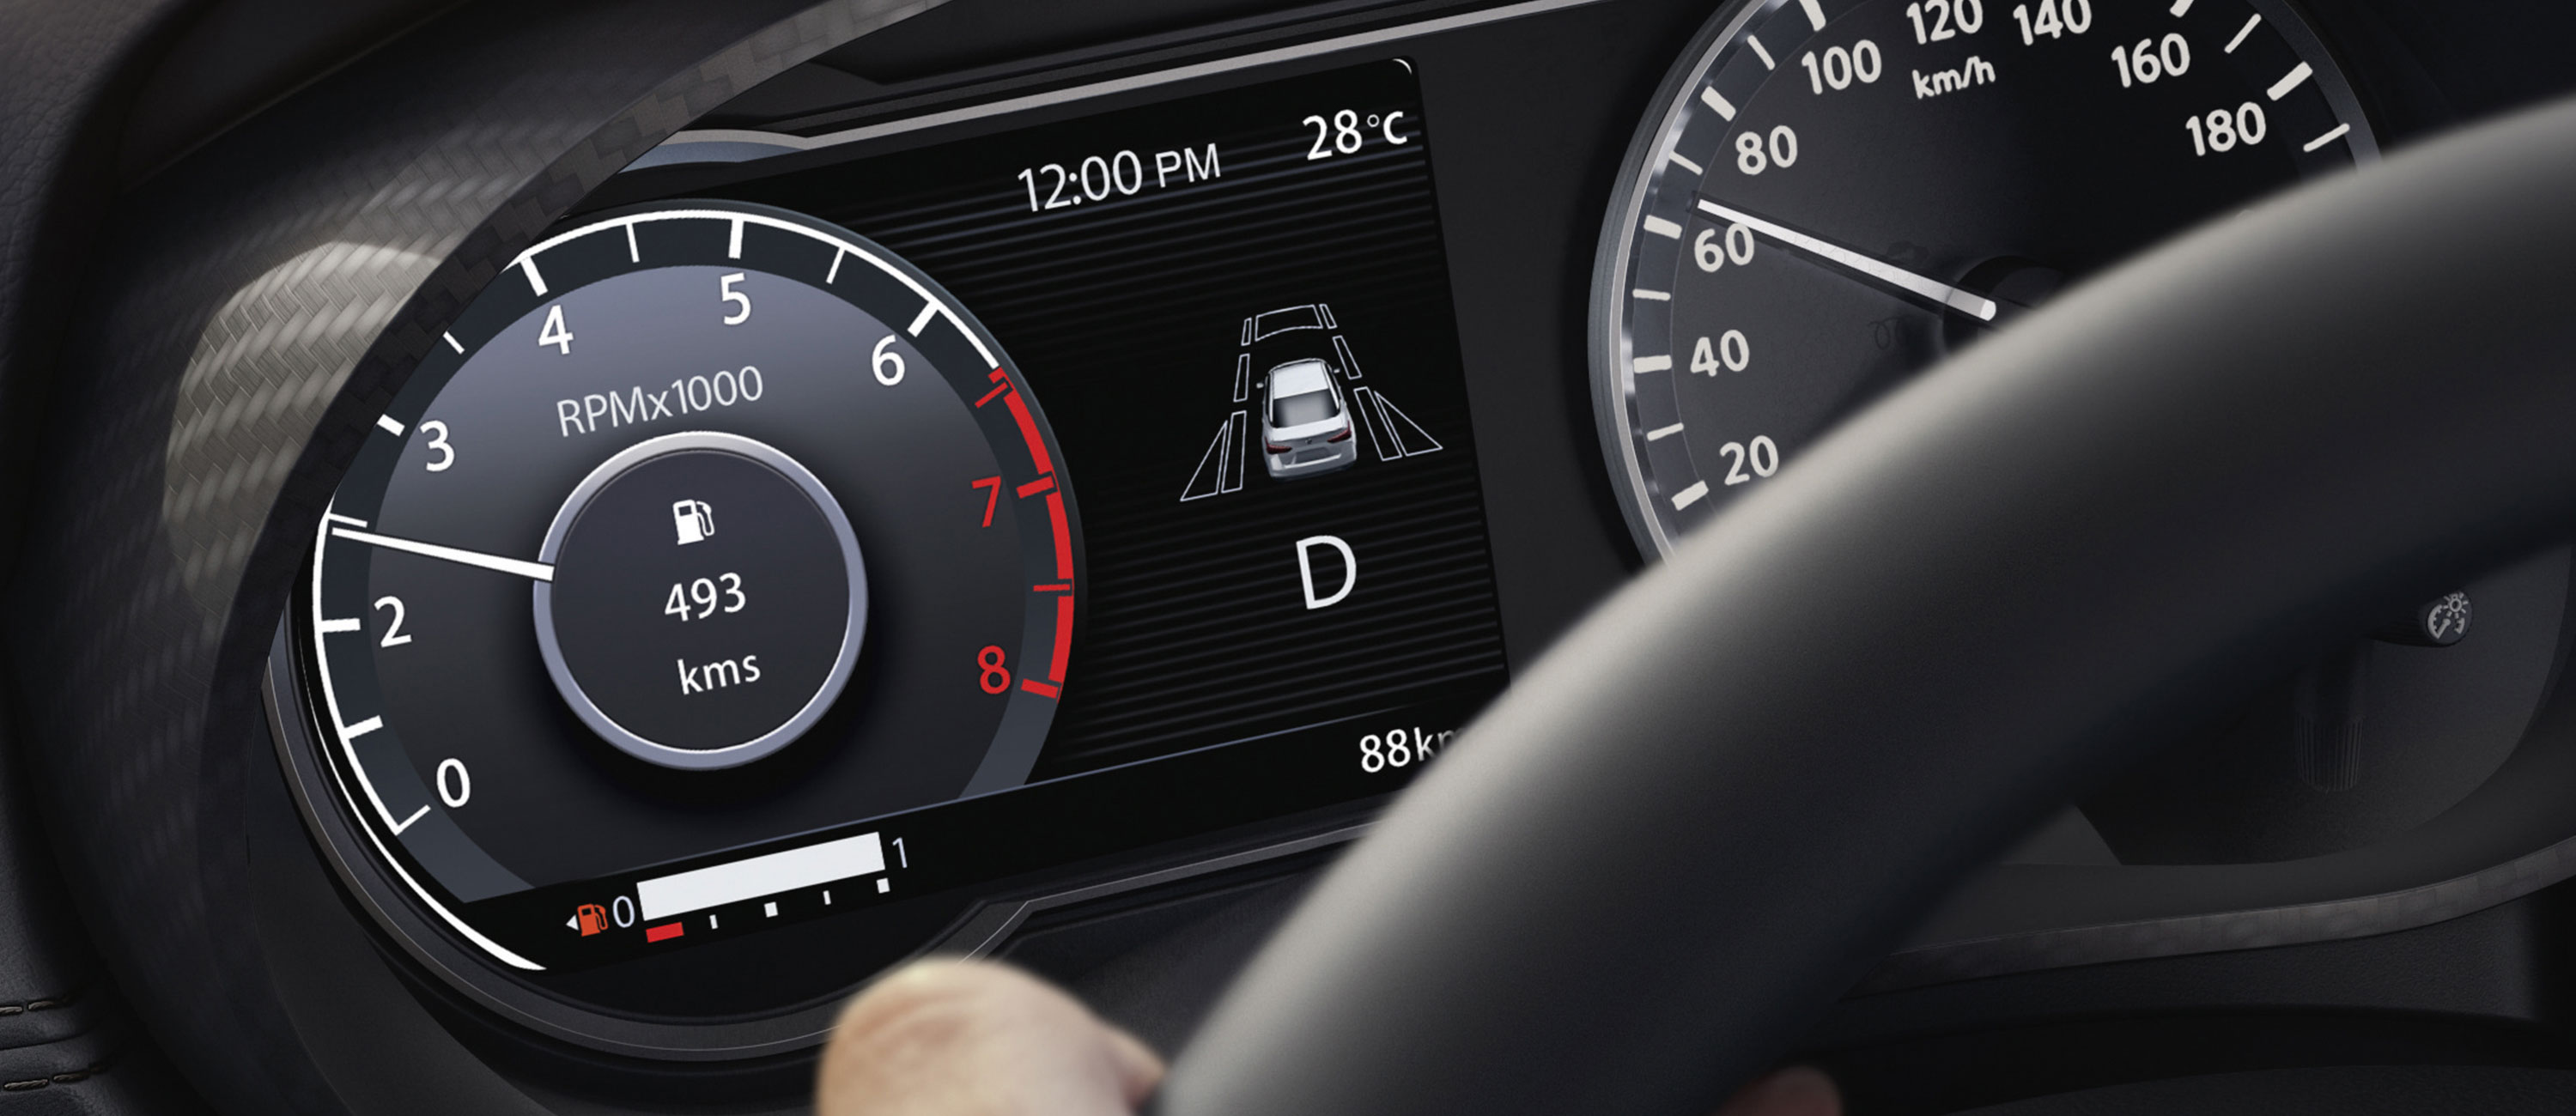 Nissan SUNNY Advanced Drive Assist Display showing tachometer